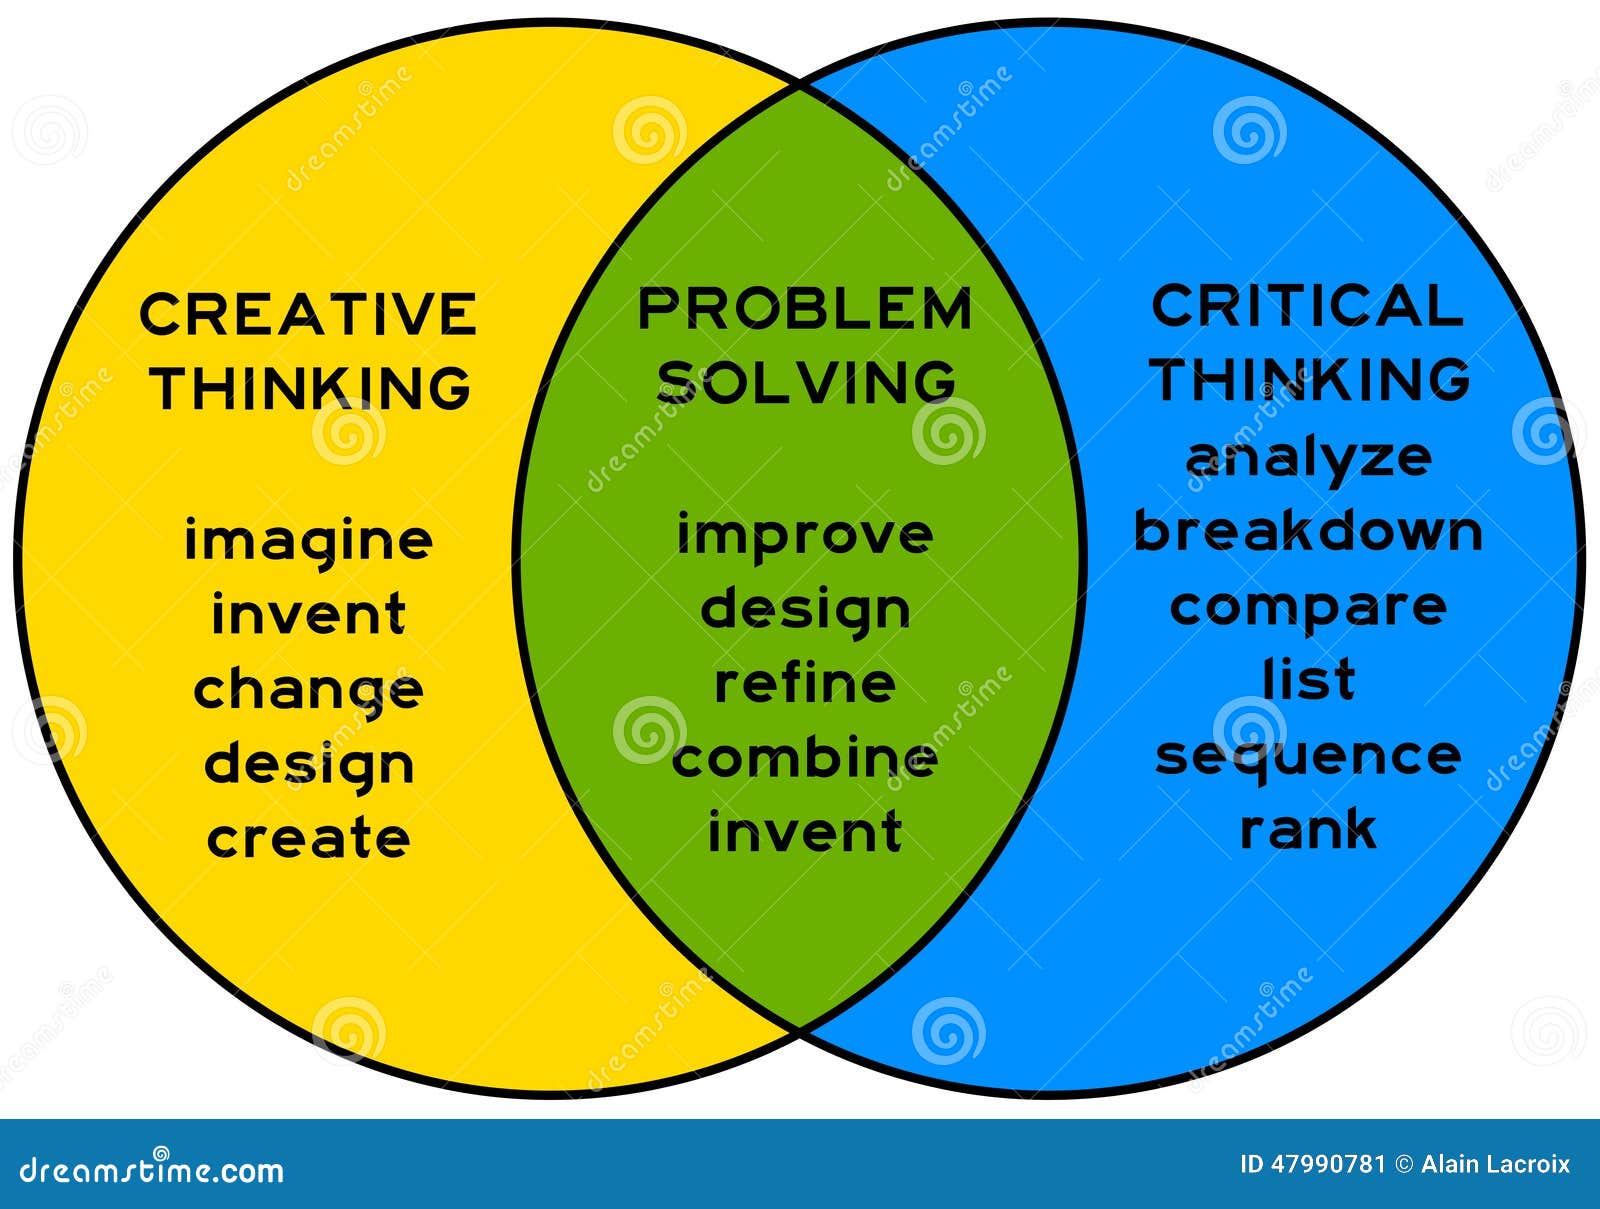 similarities between problem solving and critical thinking